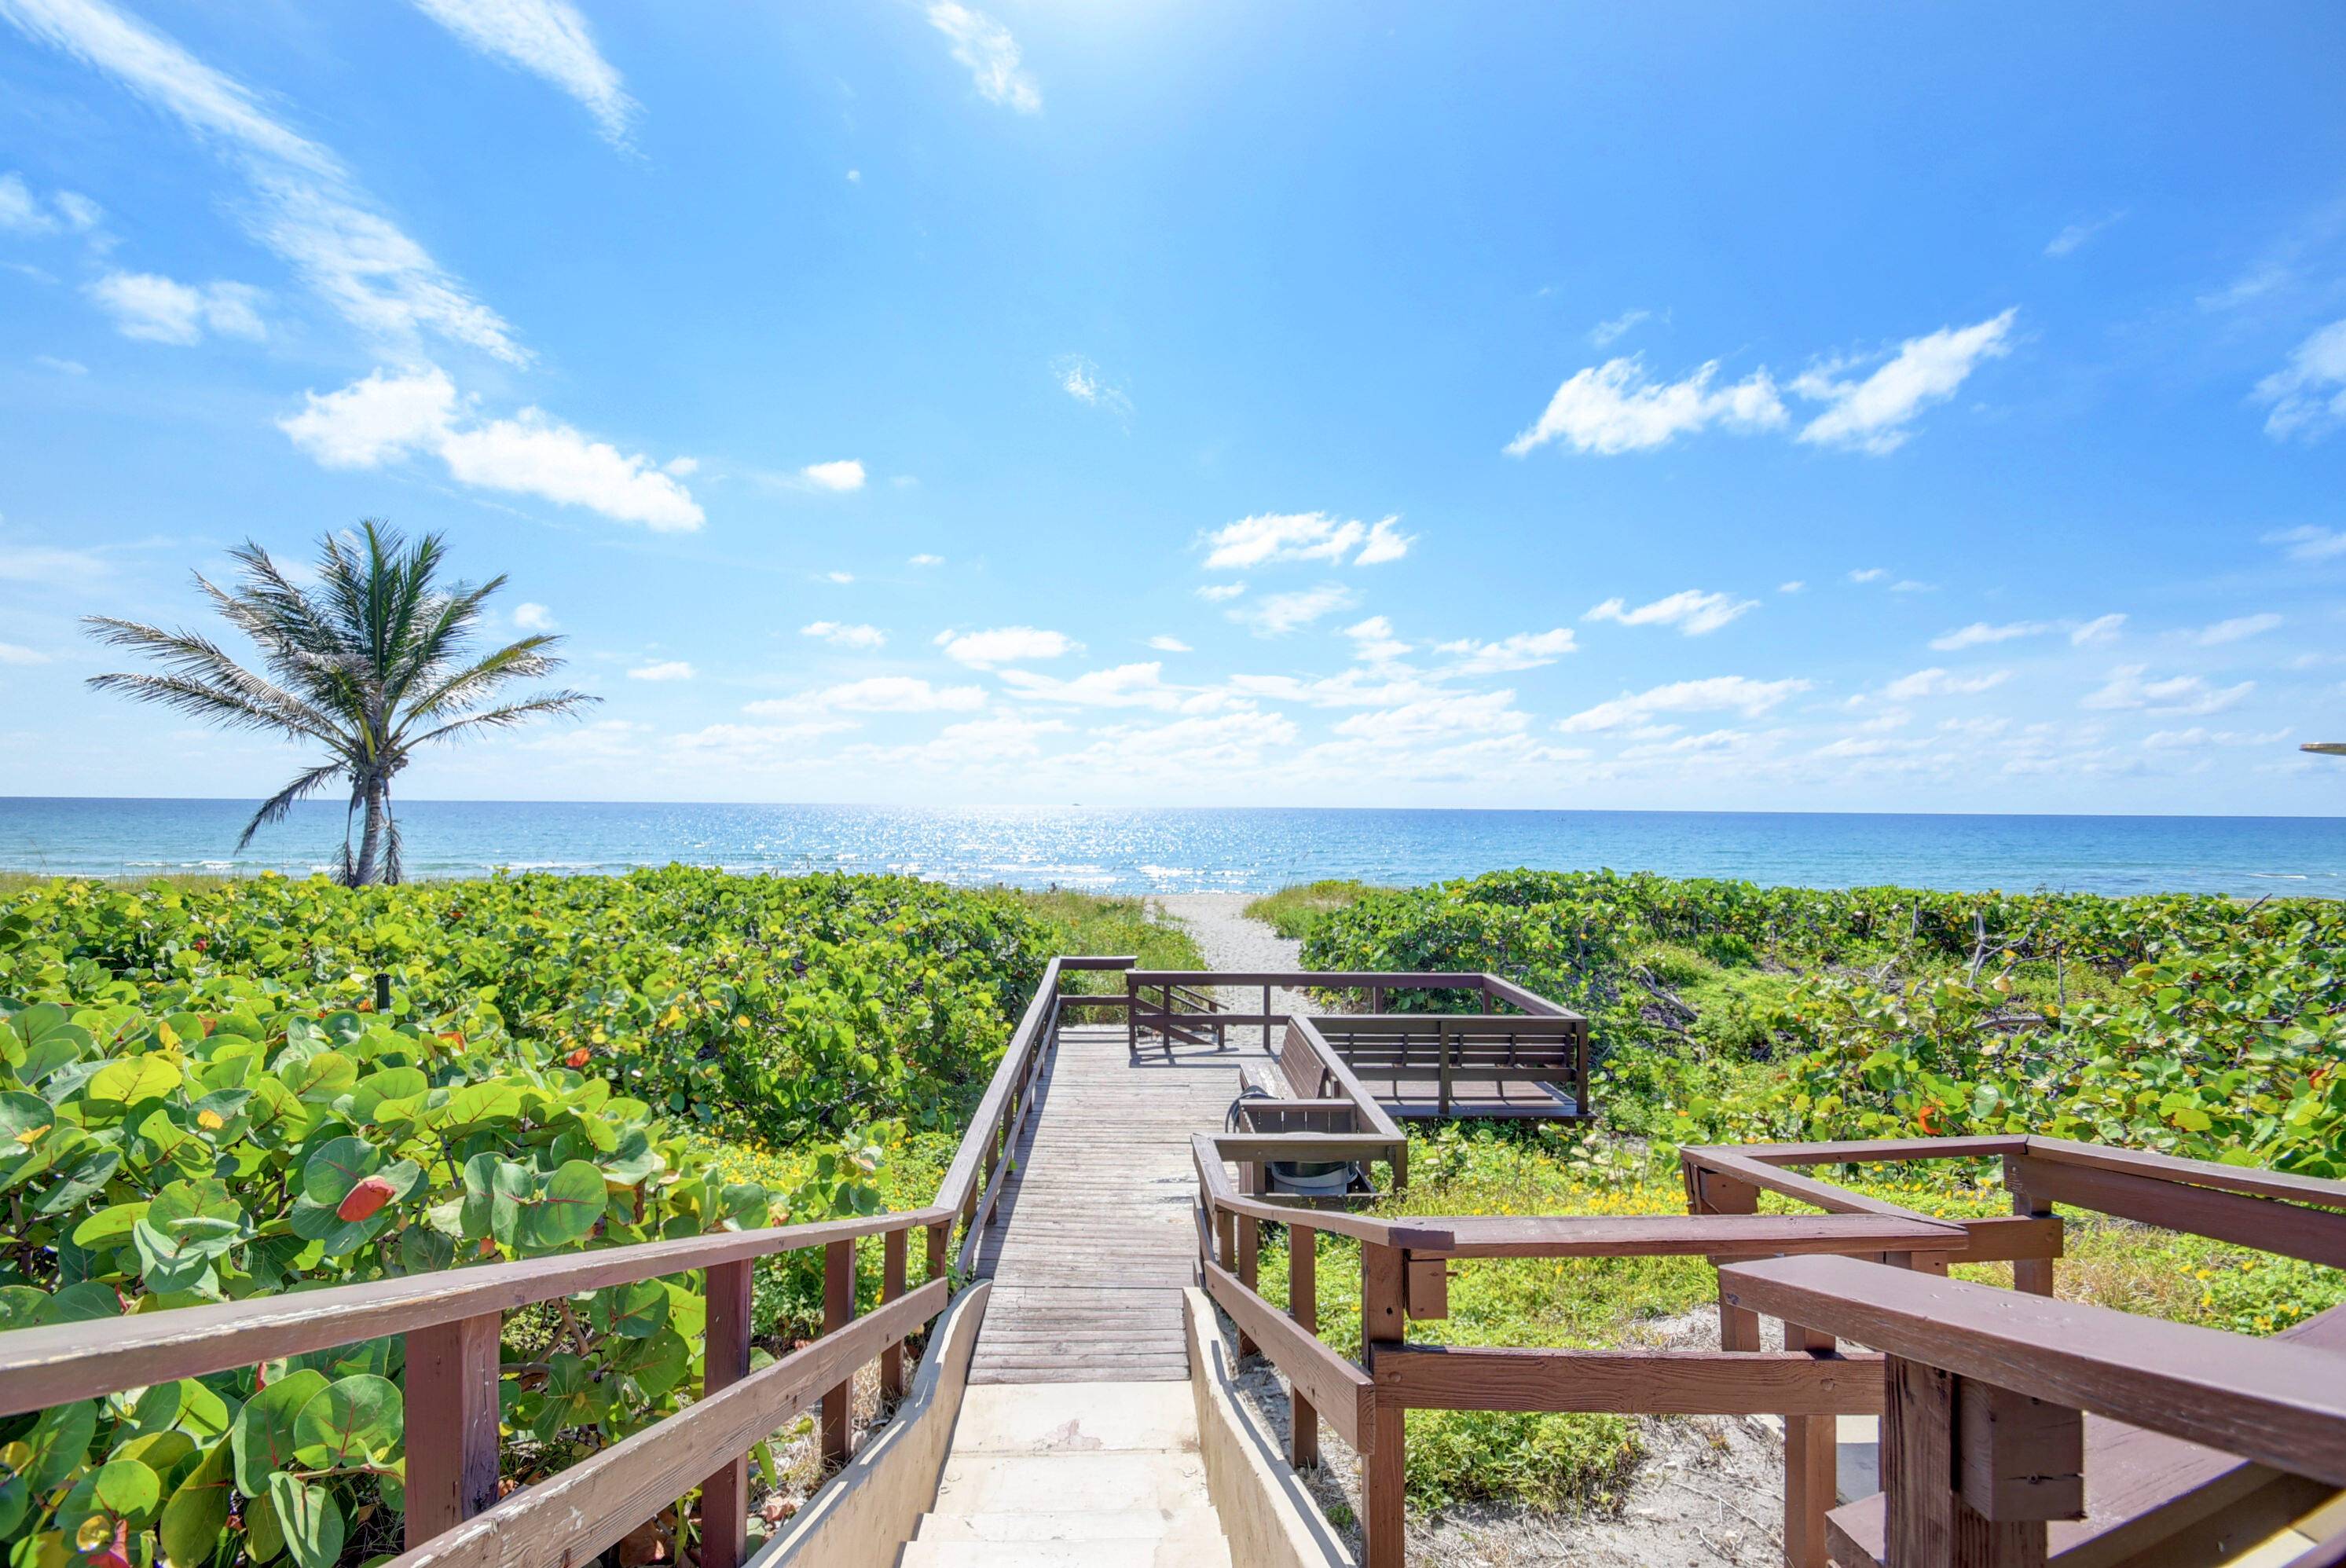 This beautiful 2 bedroom 2 bath condo is located in the lovely beach front community of San Remo, across from one of the finest beaches in Boca Raton.